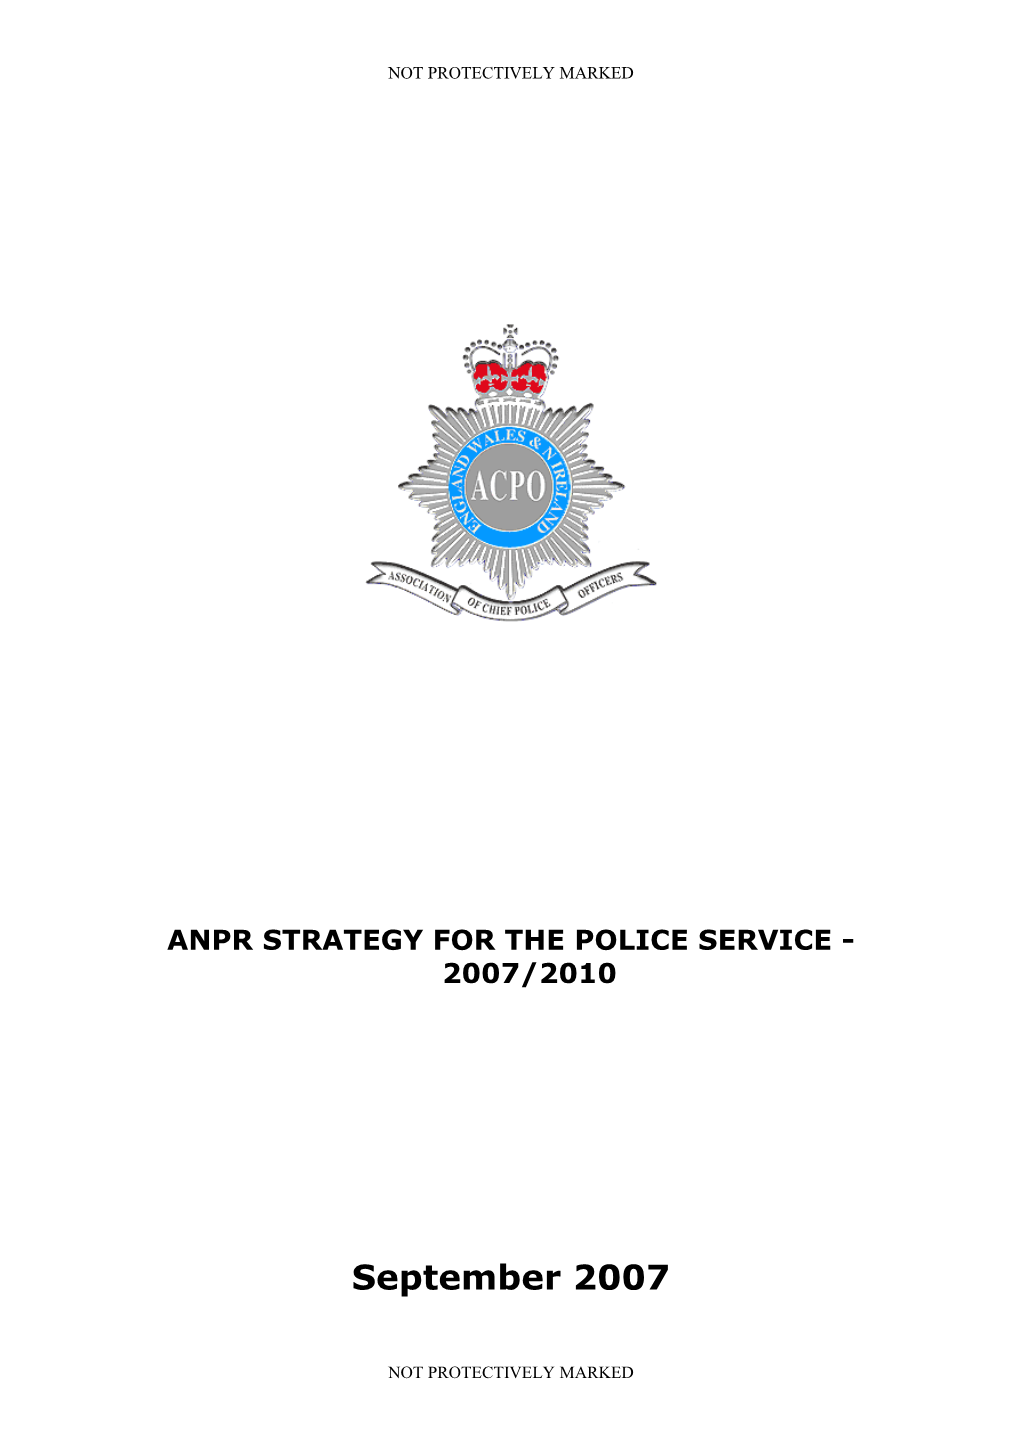 ANPR Strategy for the Police Servoce - 2005/2008 - Denying Criminals the Use of the Roads